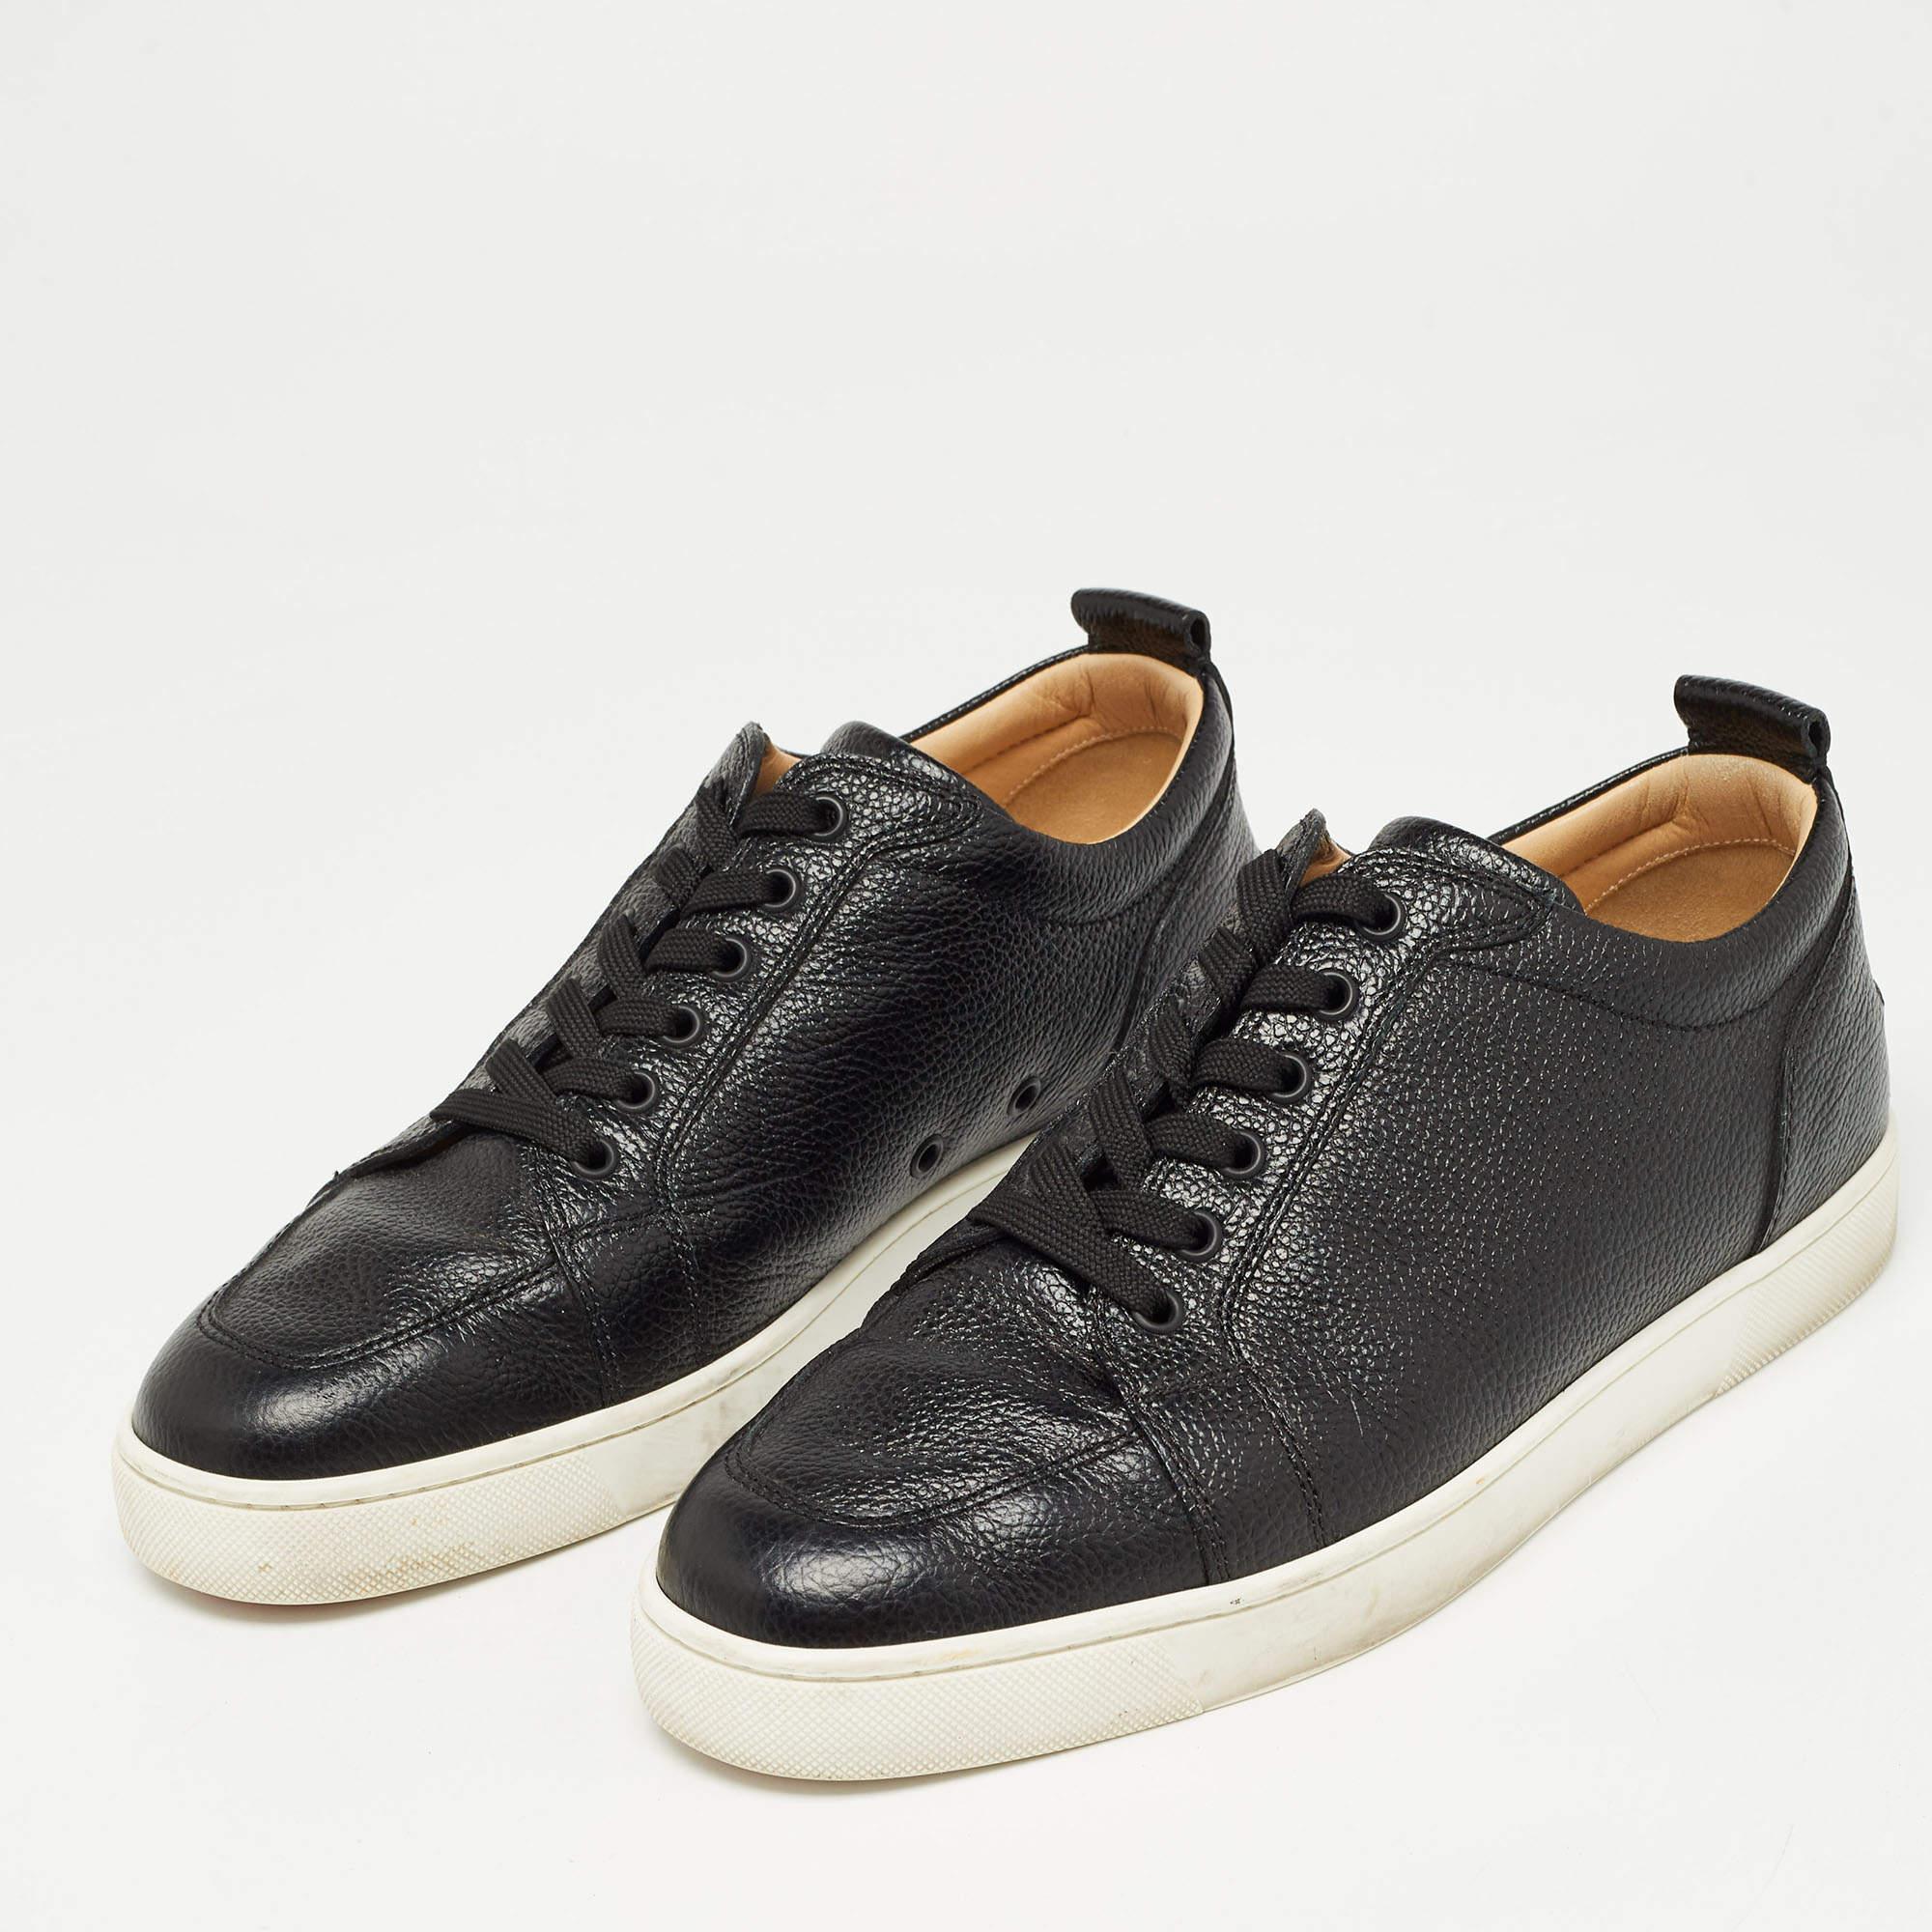 Step into fashion-forward luxury with these Christian Louboutin sneakers. These Orlato sneakers offer a harmonious blend of style and comfort, perfect for those who demand sophistication in every step.

